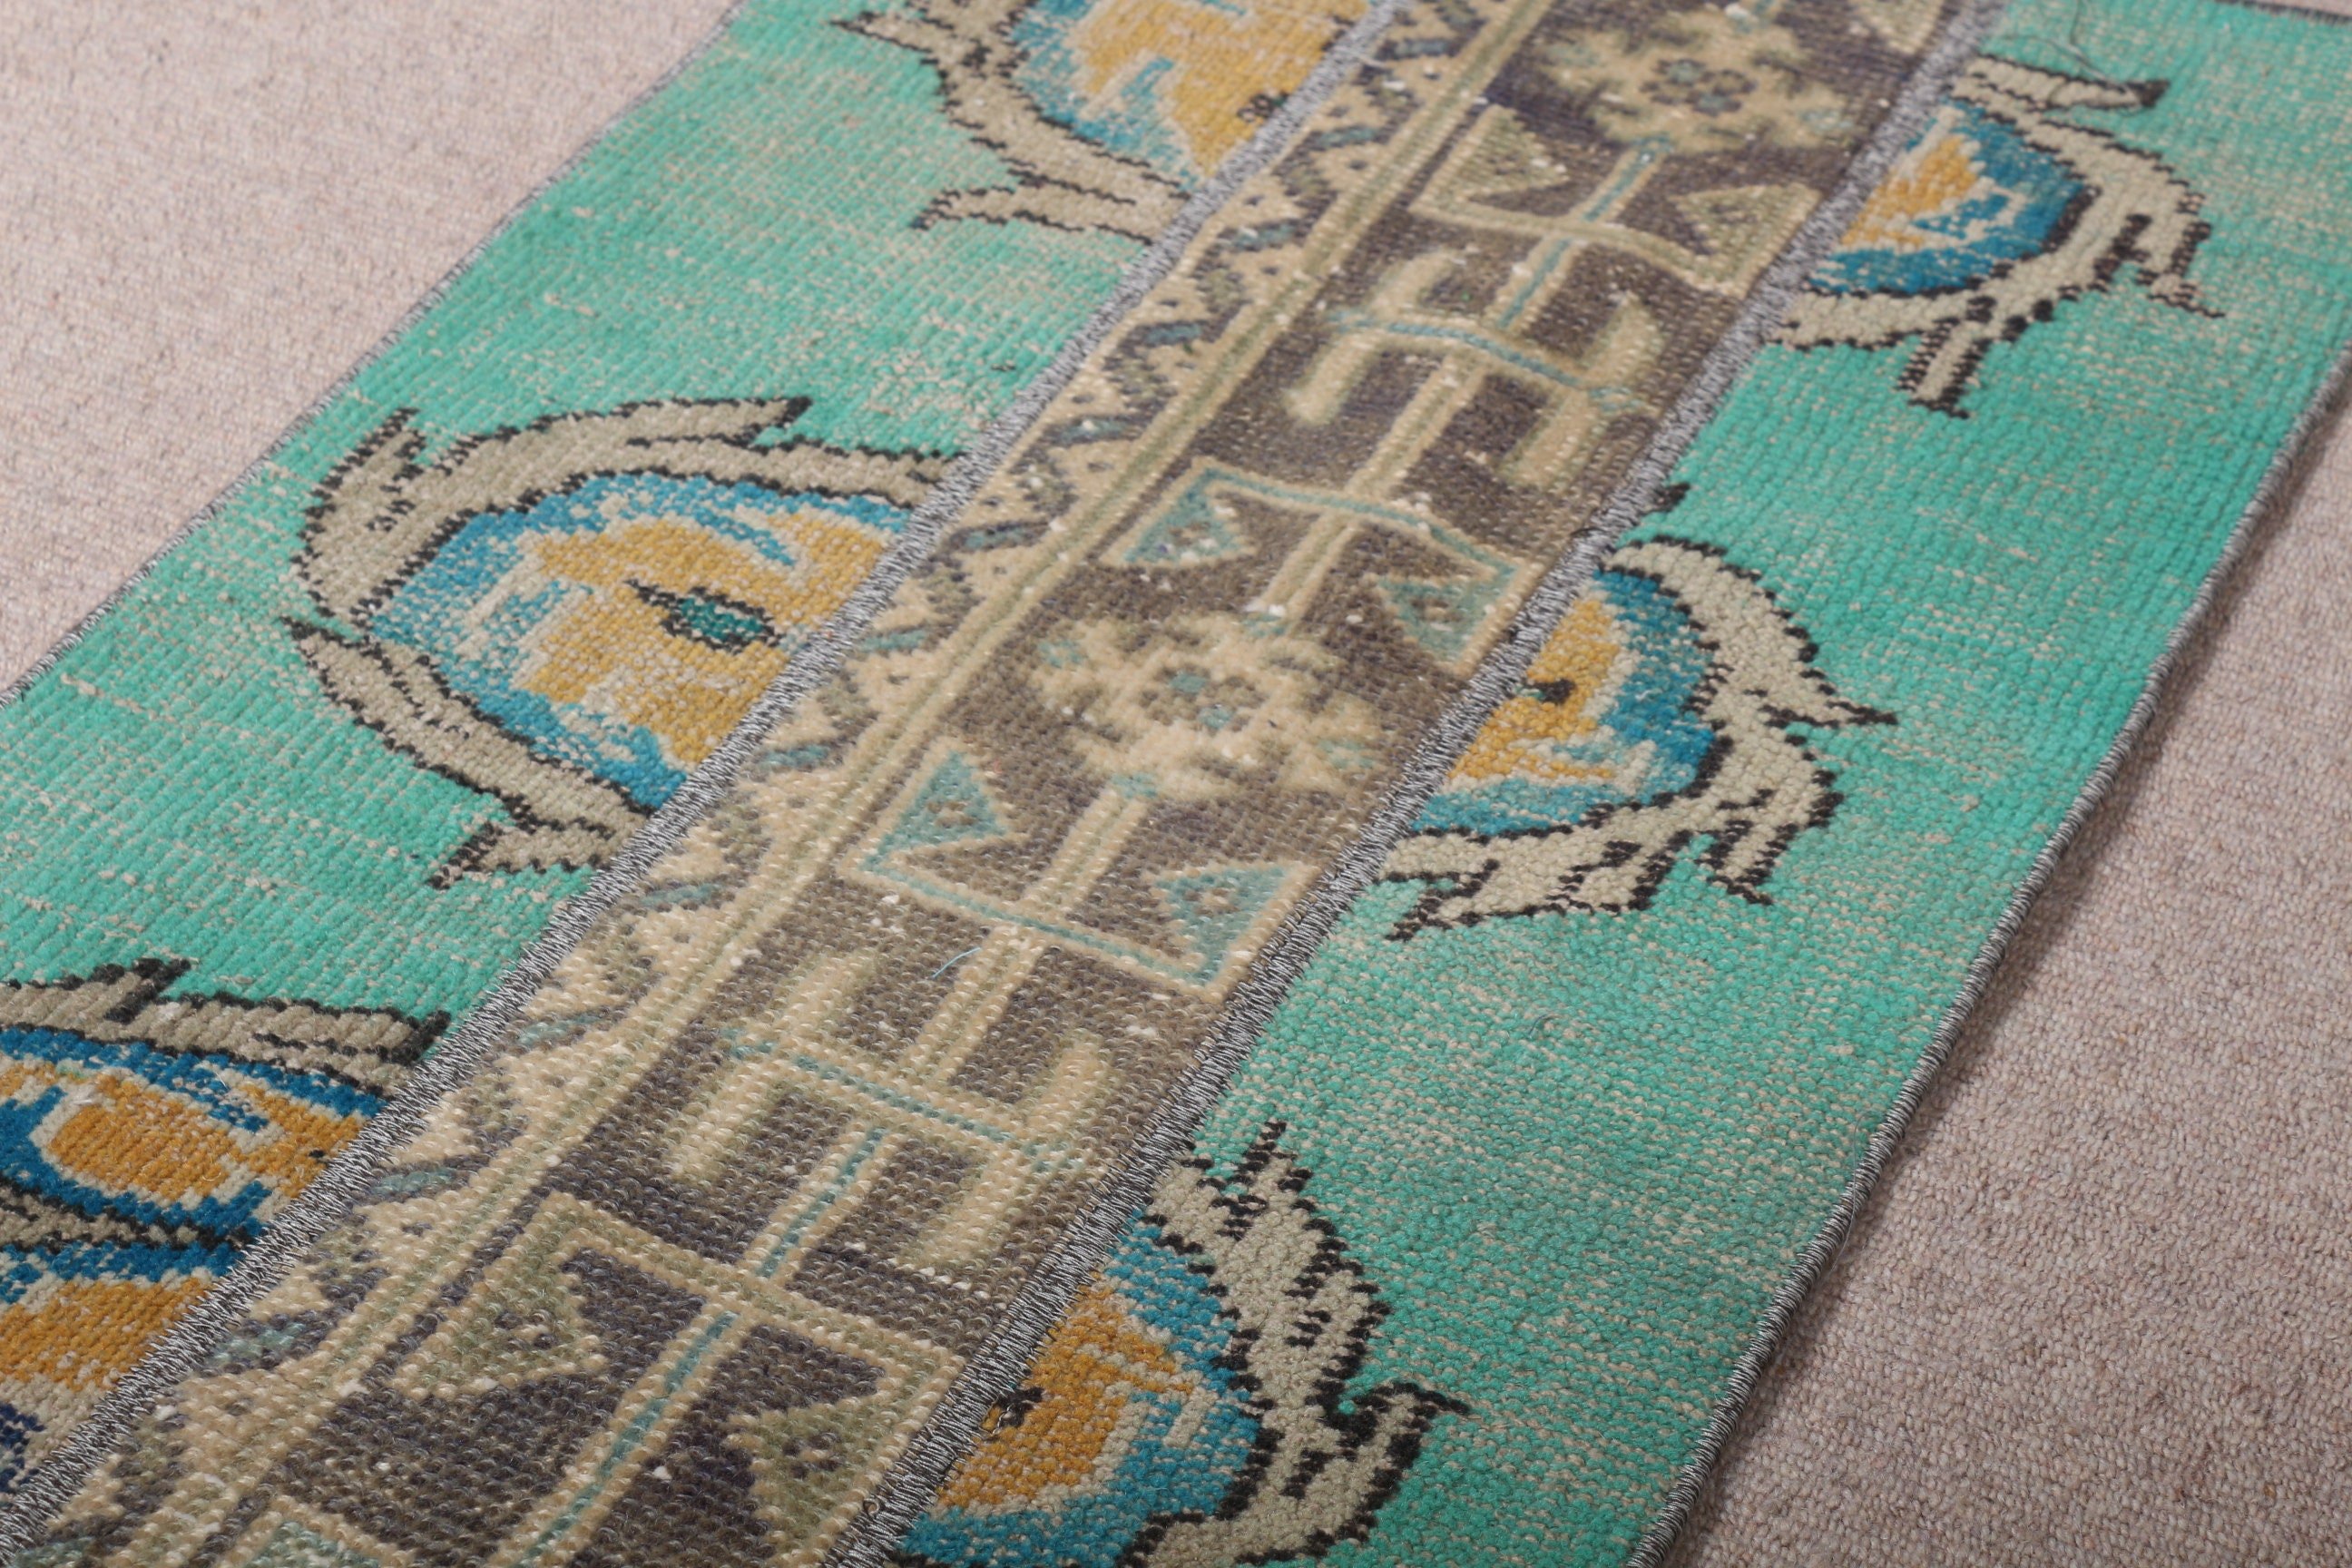 Rugs for Entry, Wool Rugs, Vintage Rugs, Entry Rugs, Bath Rugs, Green Moroccan Rug, Turkish Rugs, Oushak Rugs, 1.8x3.1 ft Small Rugs